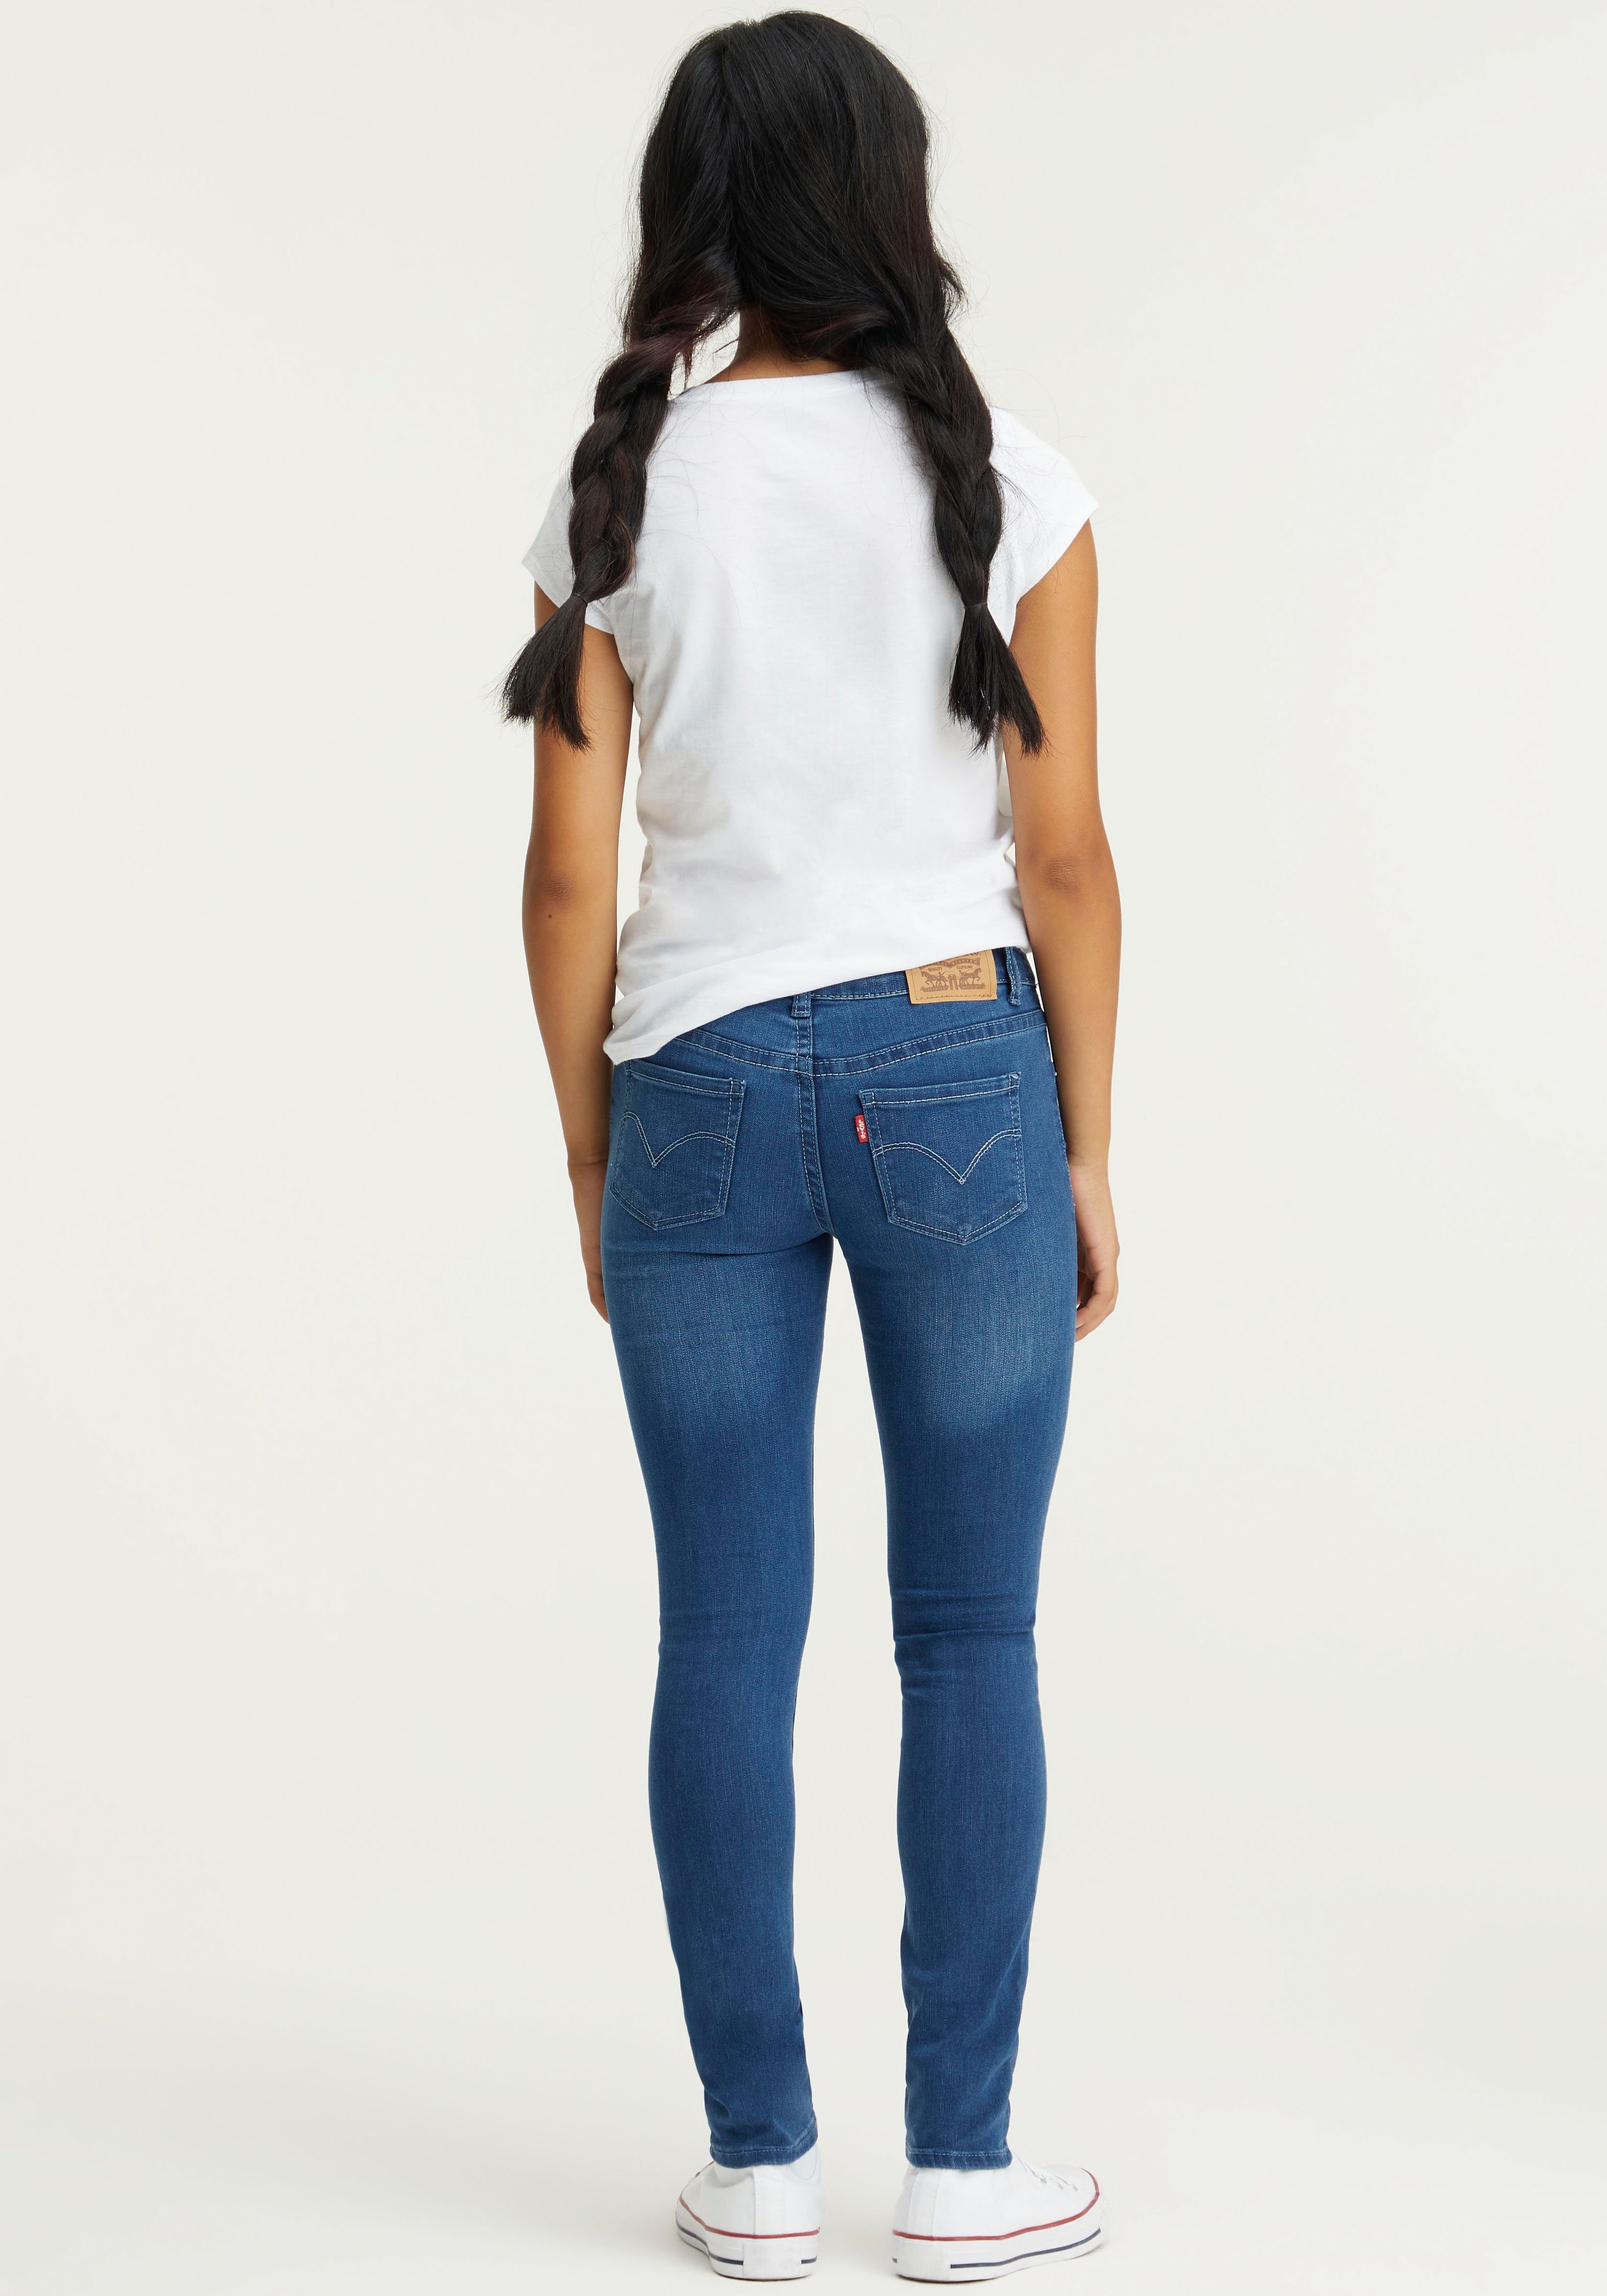 JEANS GIRLS SKINNY for FIT Levi's® Stretch-Jeans 711™ Kids